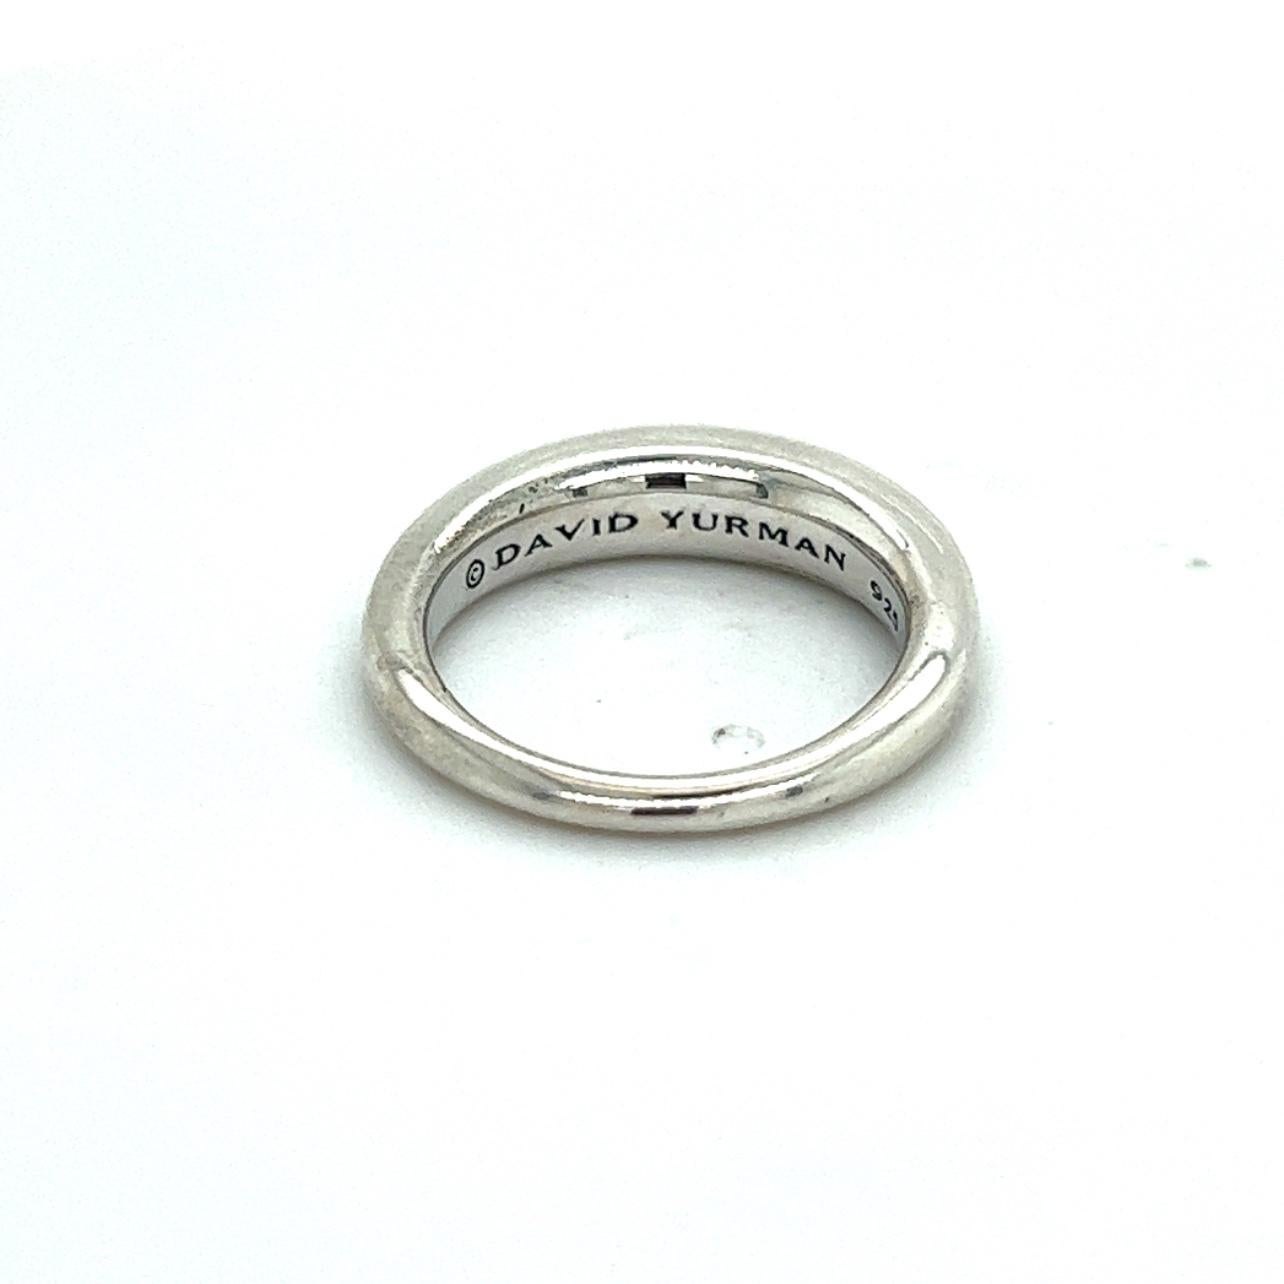 Authentic David Yurman Estate Pure Form Band Ring Size 7 Silver DY315

Retail: $599.00

PURE FROM BAND

This elegant Authentic David Yurman ring is made of sterling silver.

TRUSTED SELLER SINCE 2002

PLEASE SEE OUR HUNDREDS OF POSITIVE FEEDBACKS